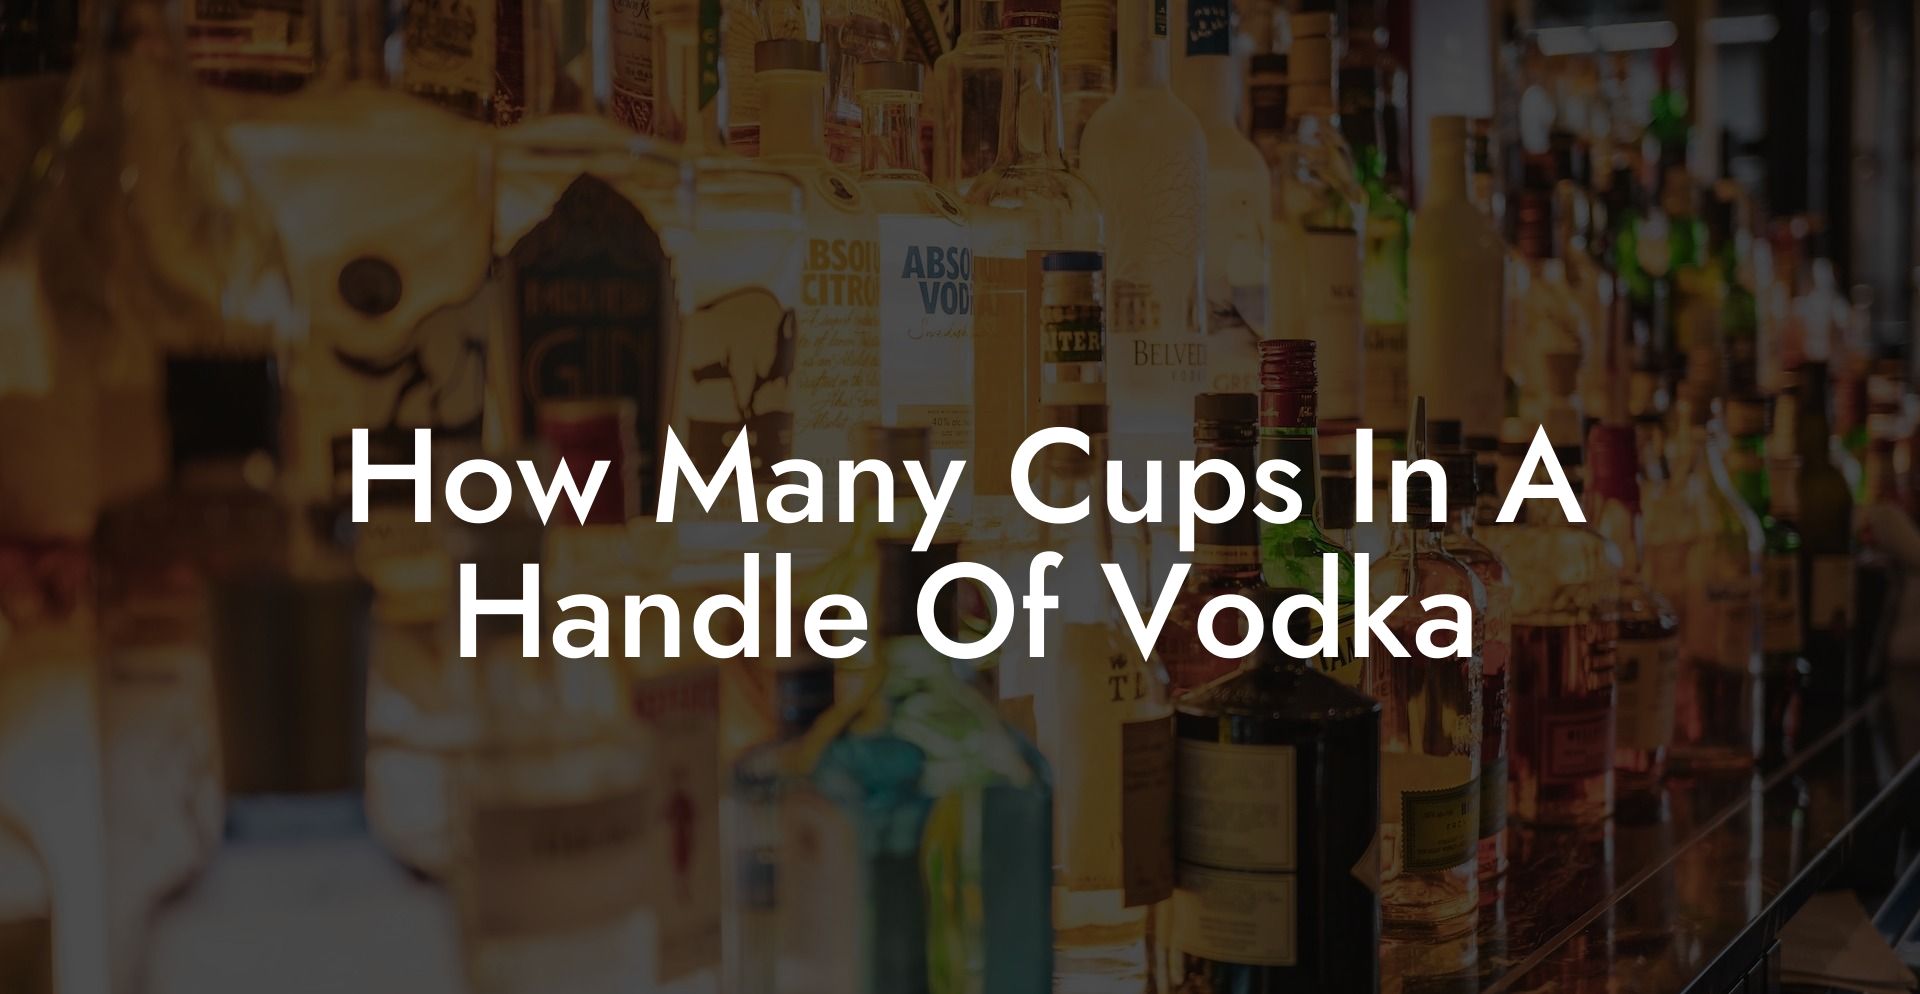 How Many Cups In A Handle Of Vodka